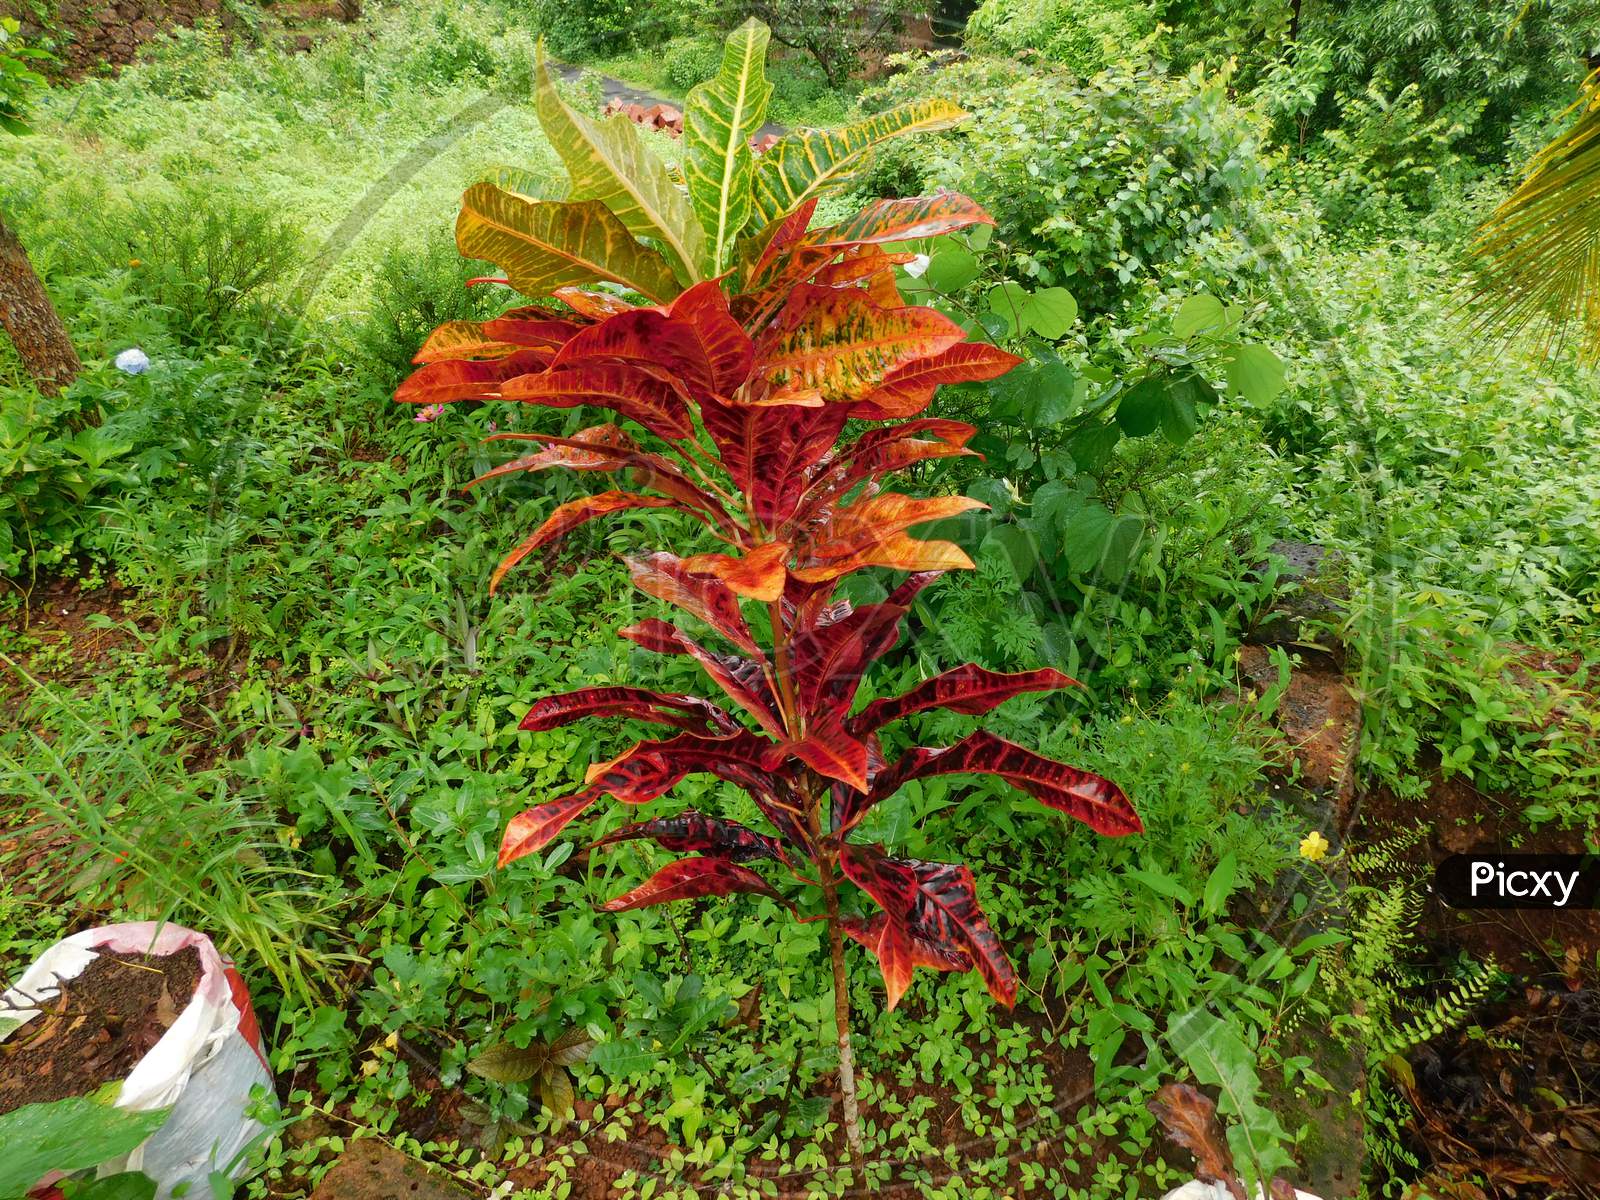 A beautiful plant with colorful leaves inside the plantation